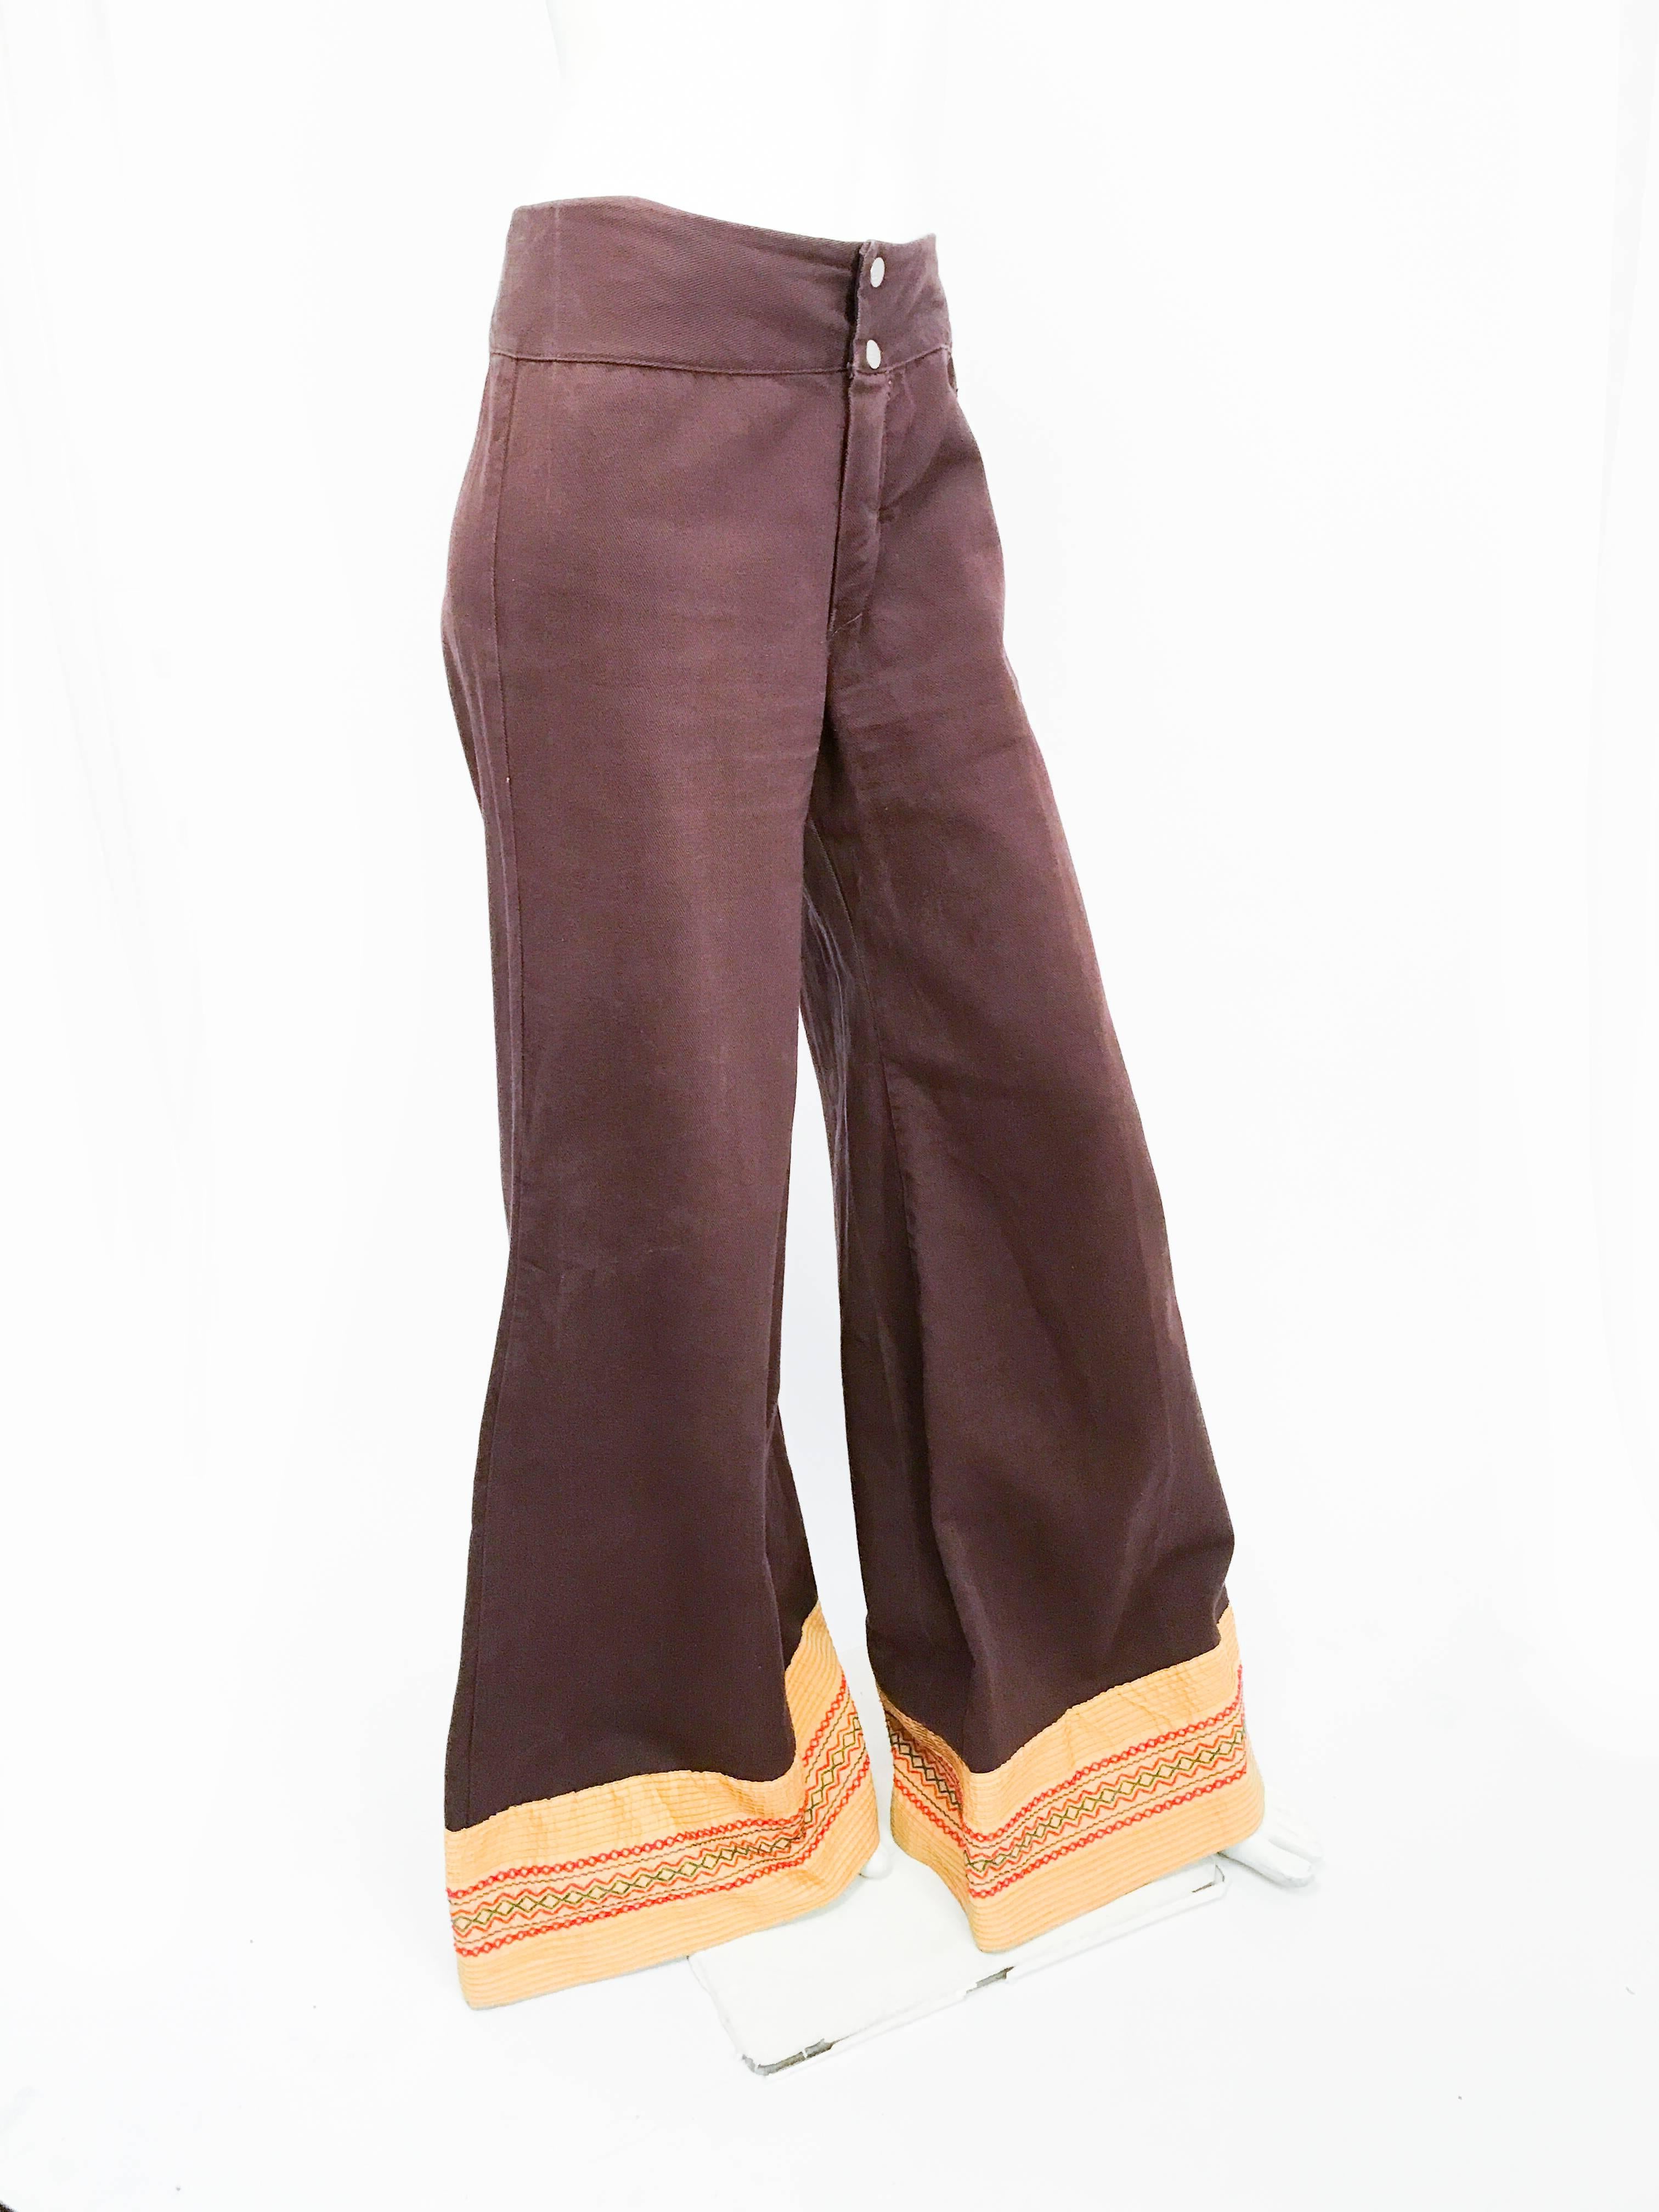 1970s Brown Wide-legged Pants with Embellished Hem. Brown wide-legged pants with embroidered yellow/green/red hems.  Zipper fly and snap reinforcement.